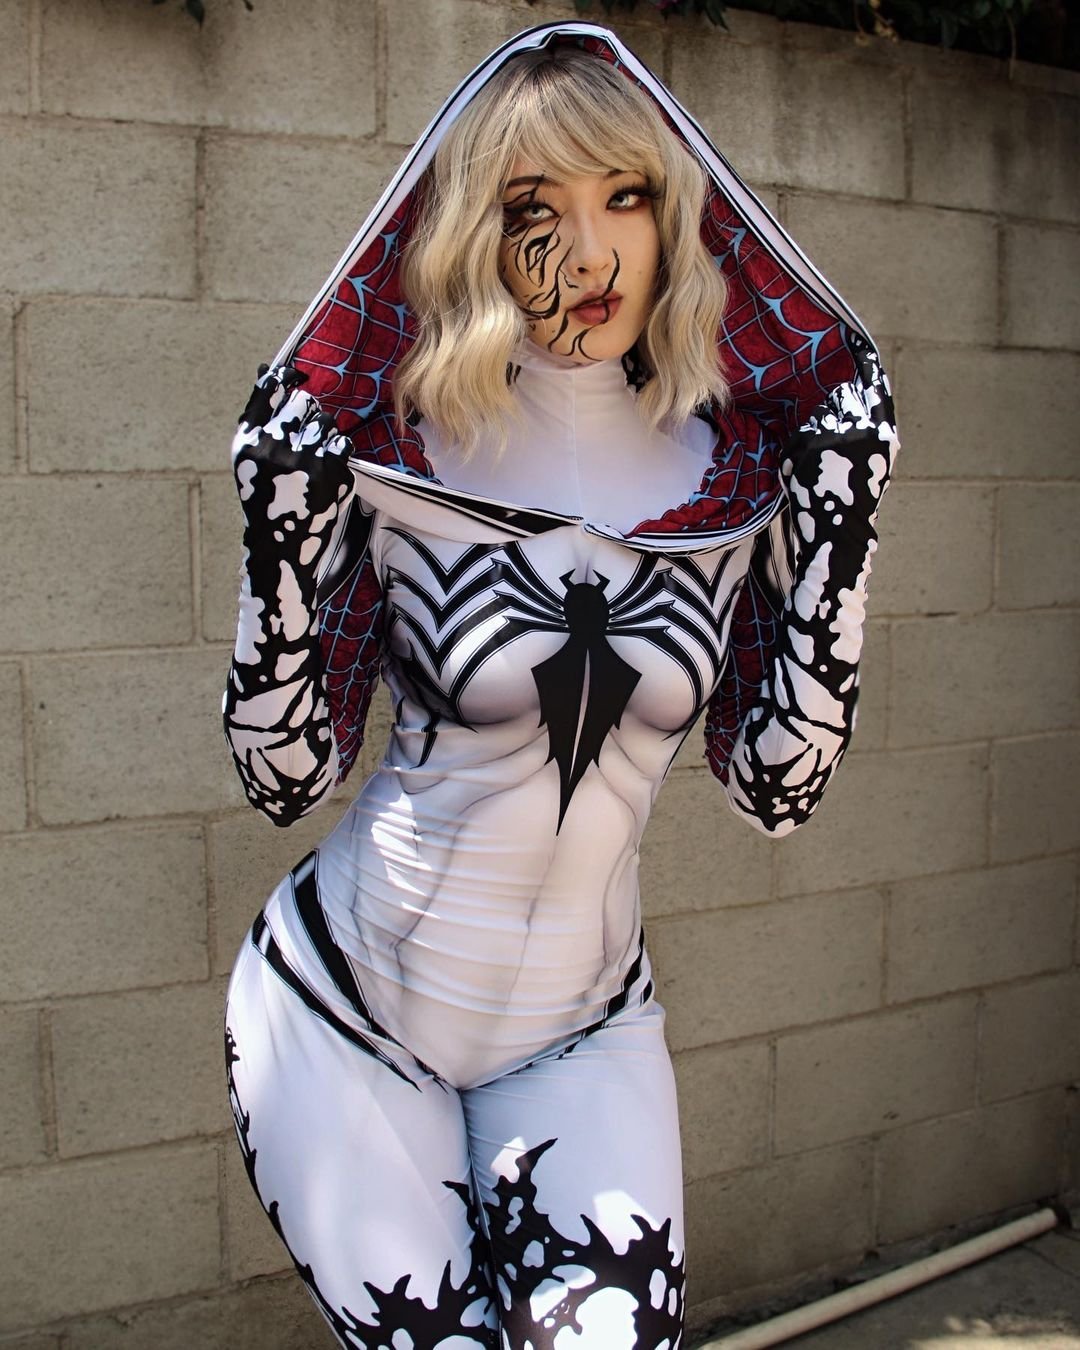 Caytie Cosplay Is Bringing In The Heat With These Amazing Works